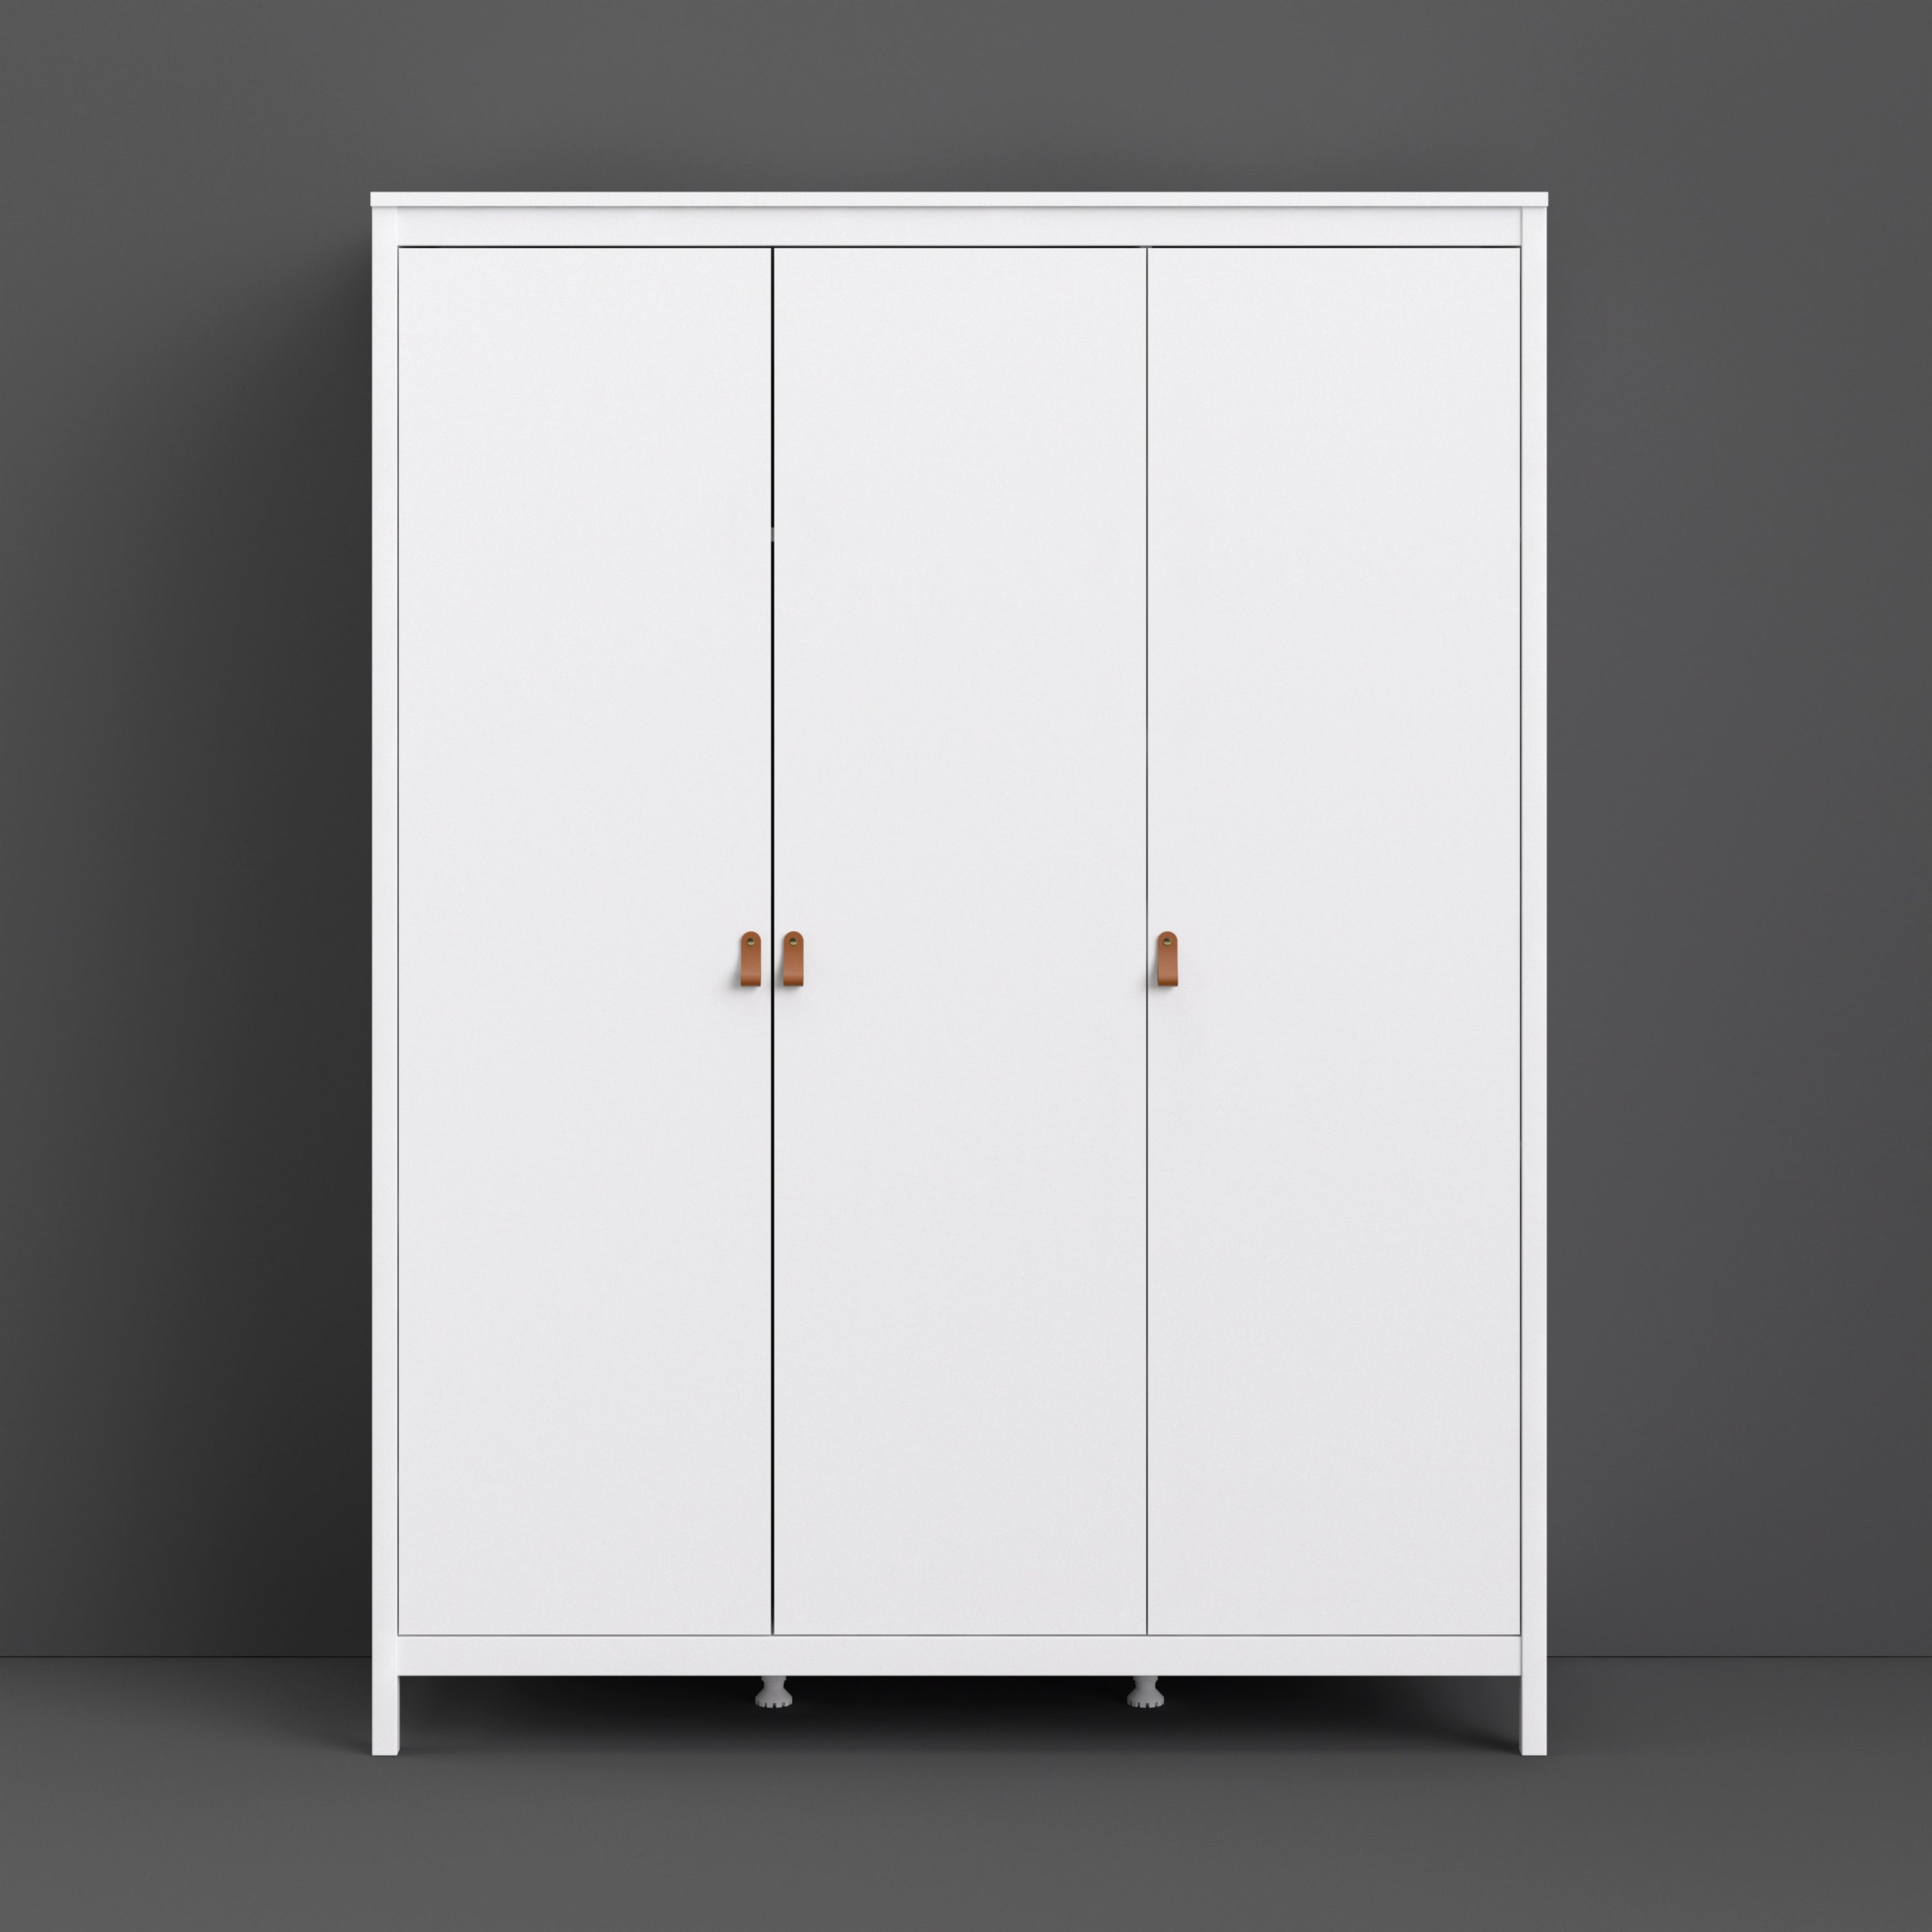 Barcelona Wardrobe with 3 Doors in White Furniture To Go Ltd